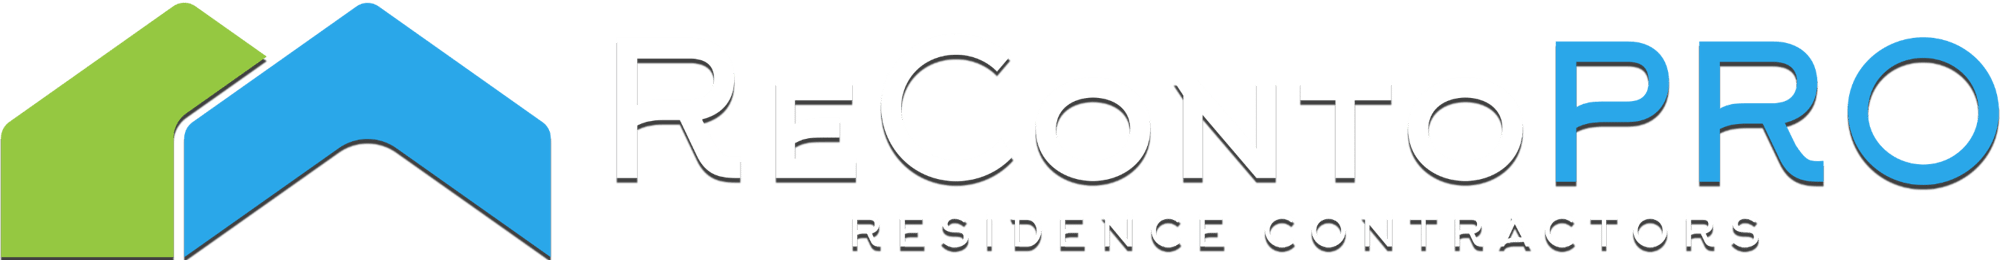 pro_residential_contractors_logo_white